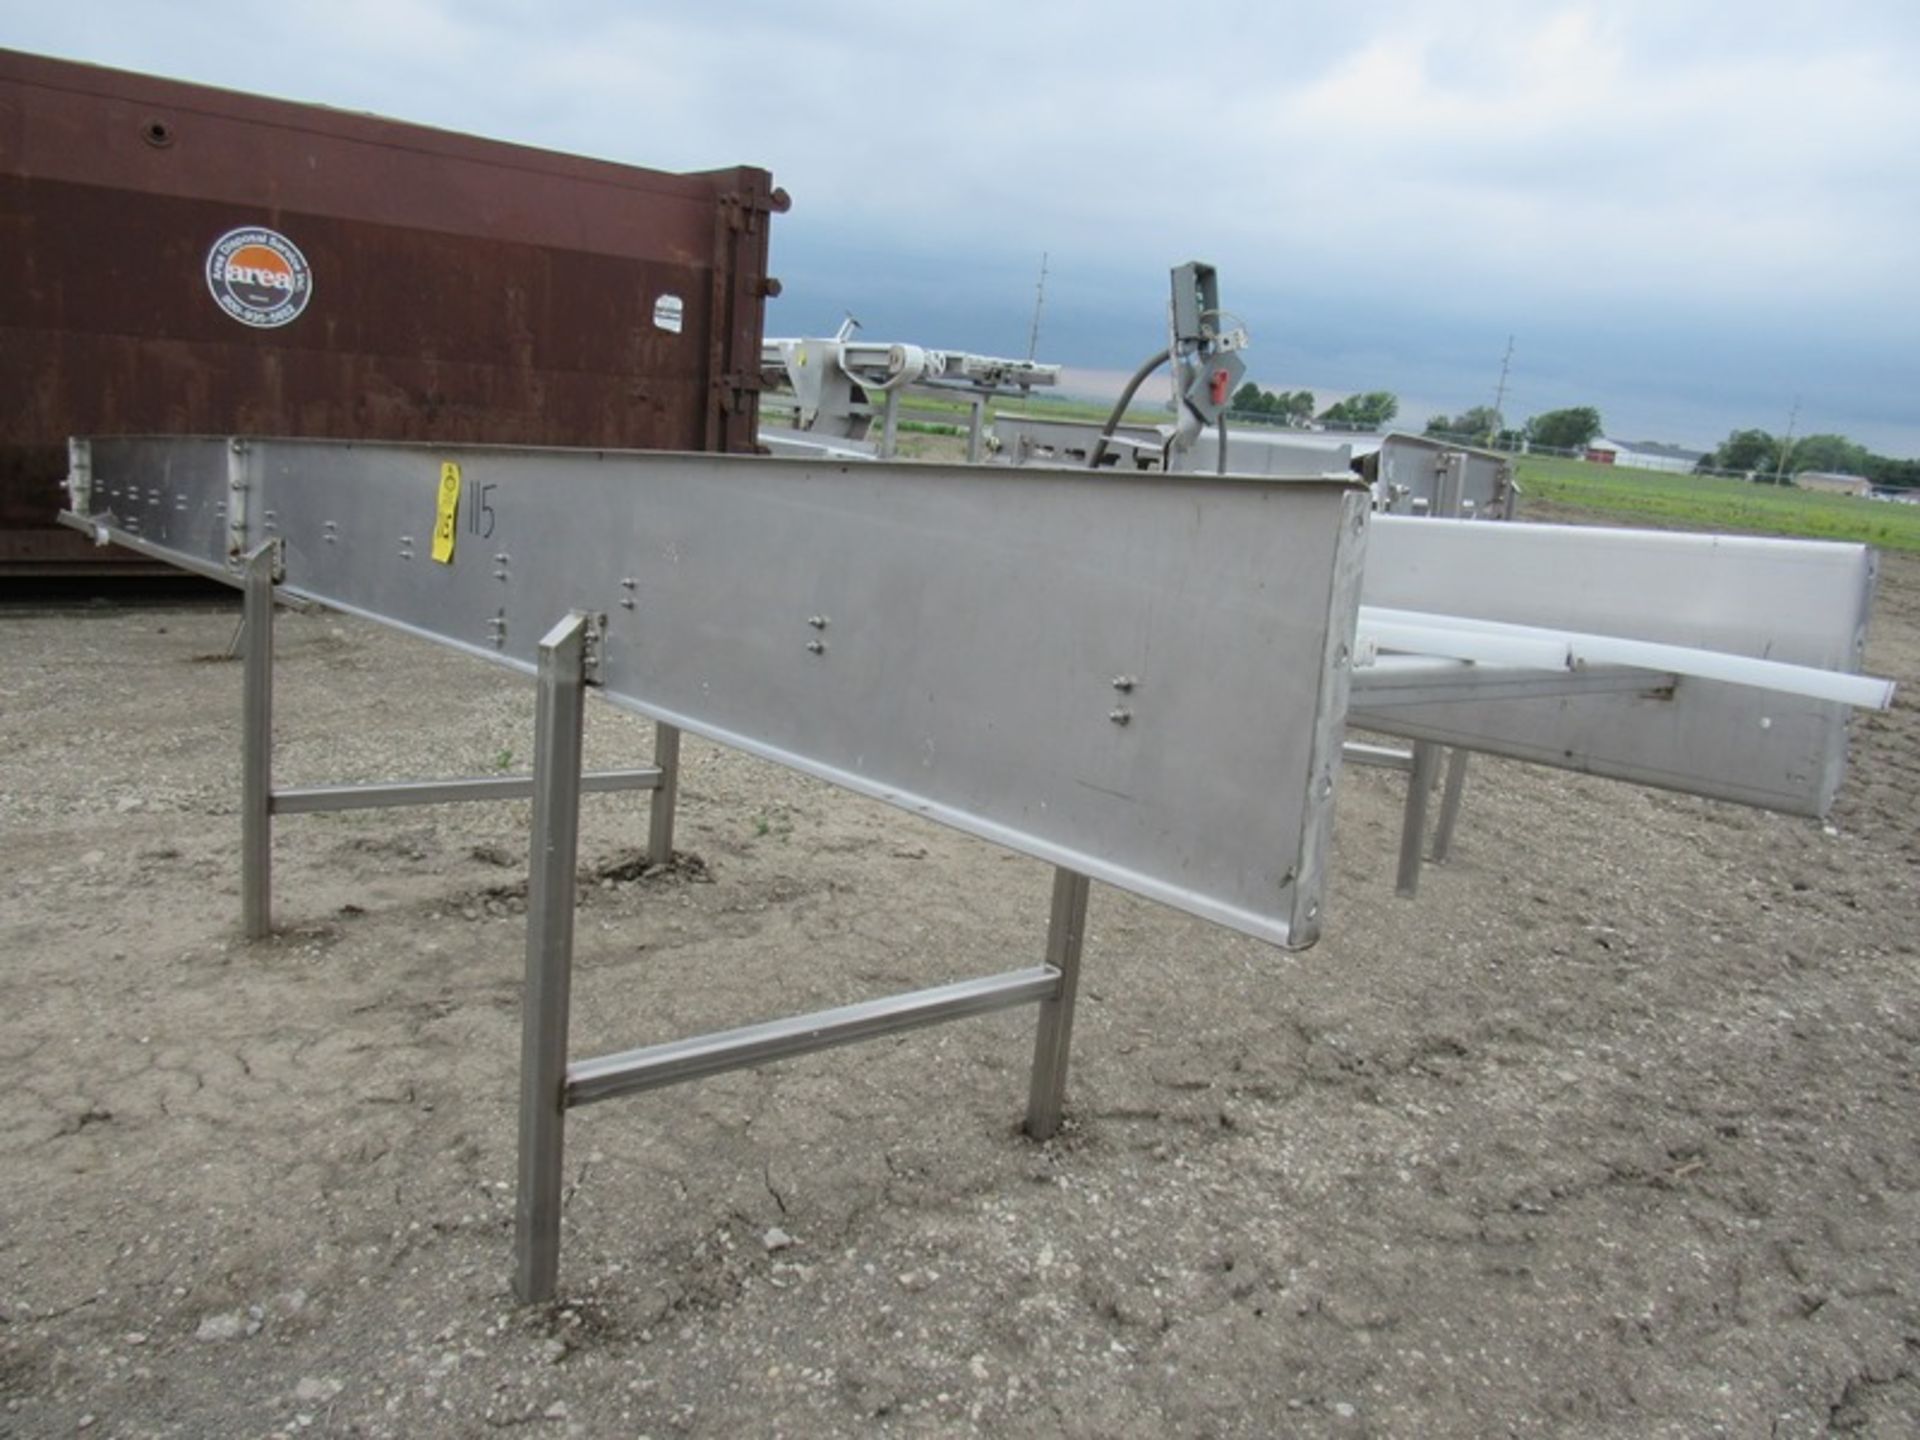 Stainless Steel Conveyor, 3" Wide X 20' Long, no drive (Loading Fee: $150.00 - Rigger: Norm